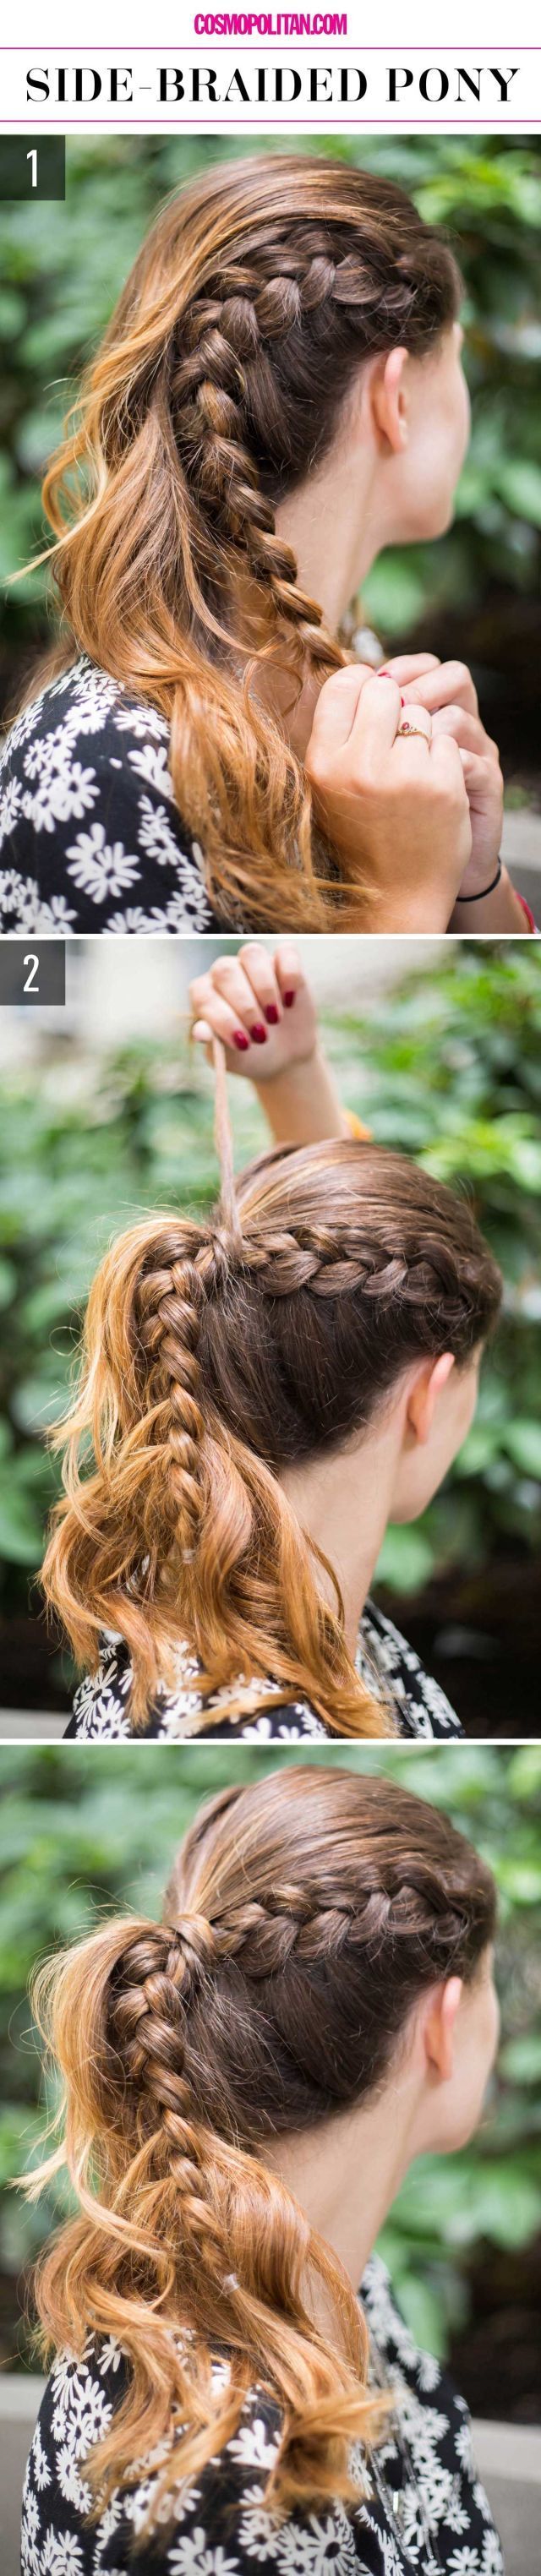 15 Super-Easy Hairstyles for Lazy Girls Who Can't Even   - Cosmopolitan.com